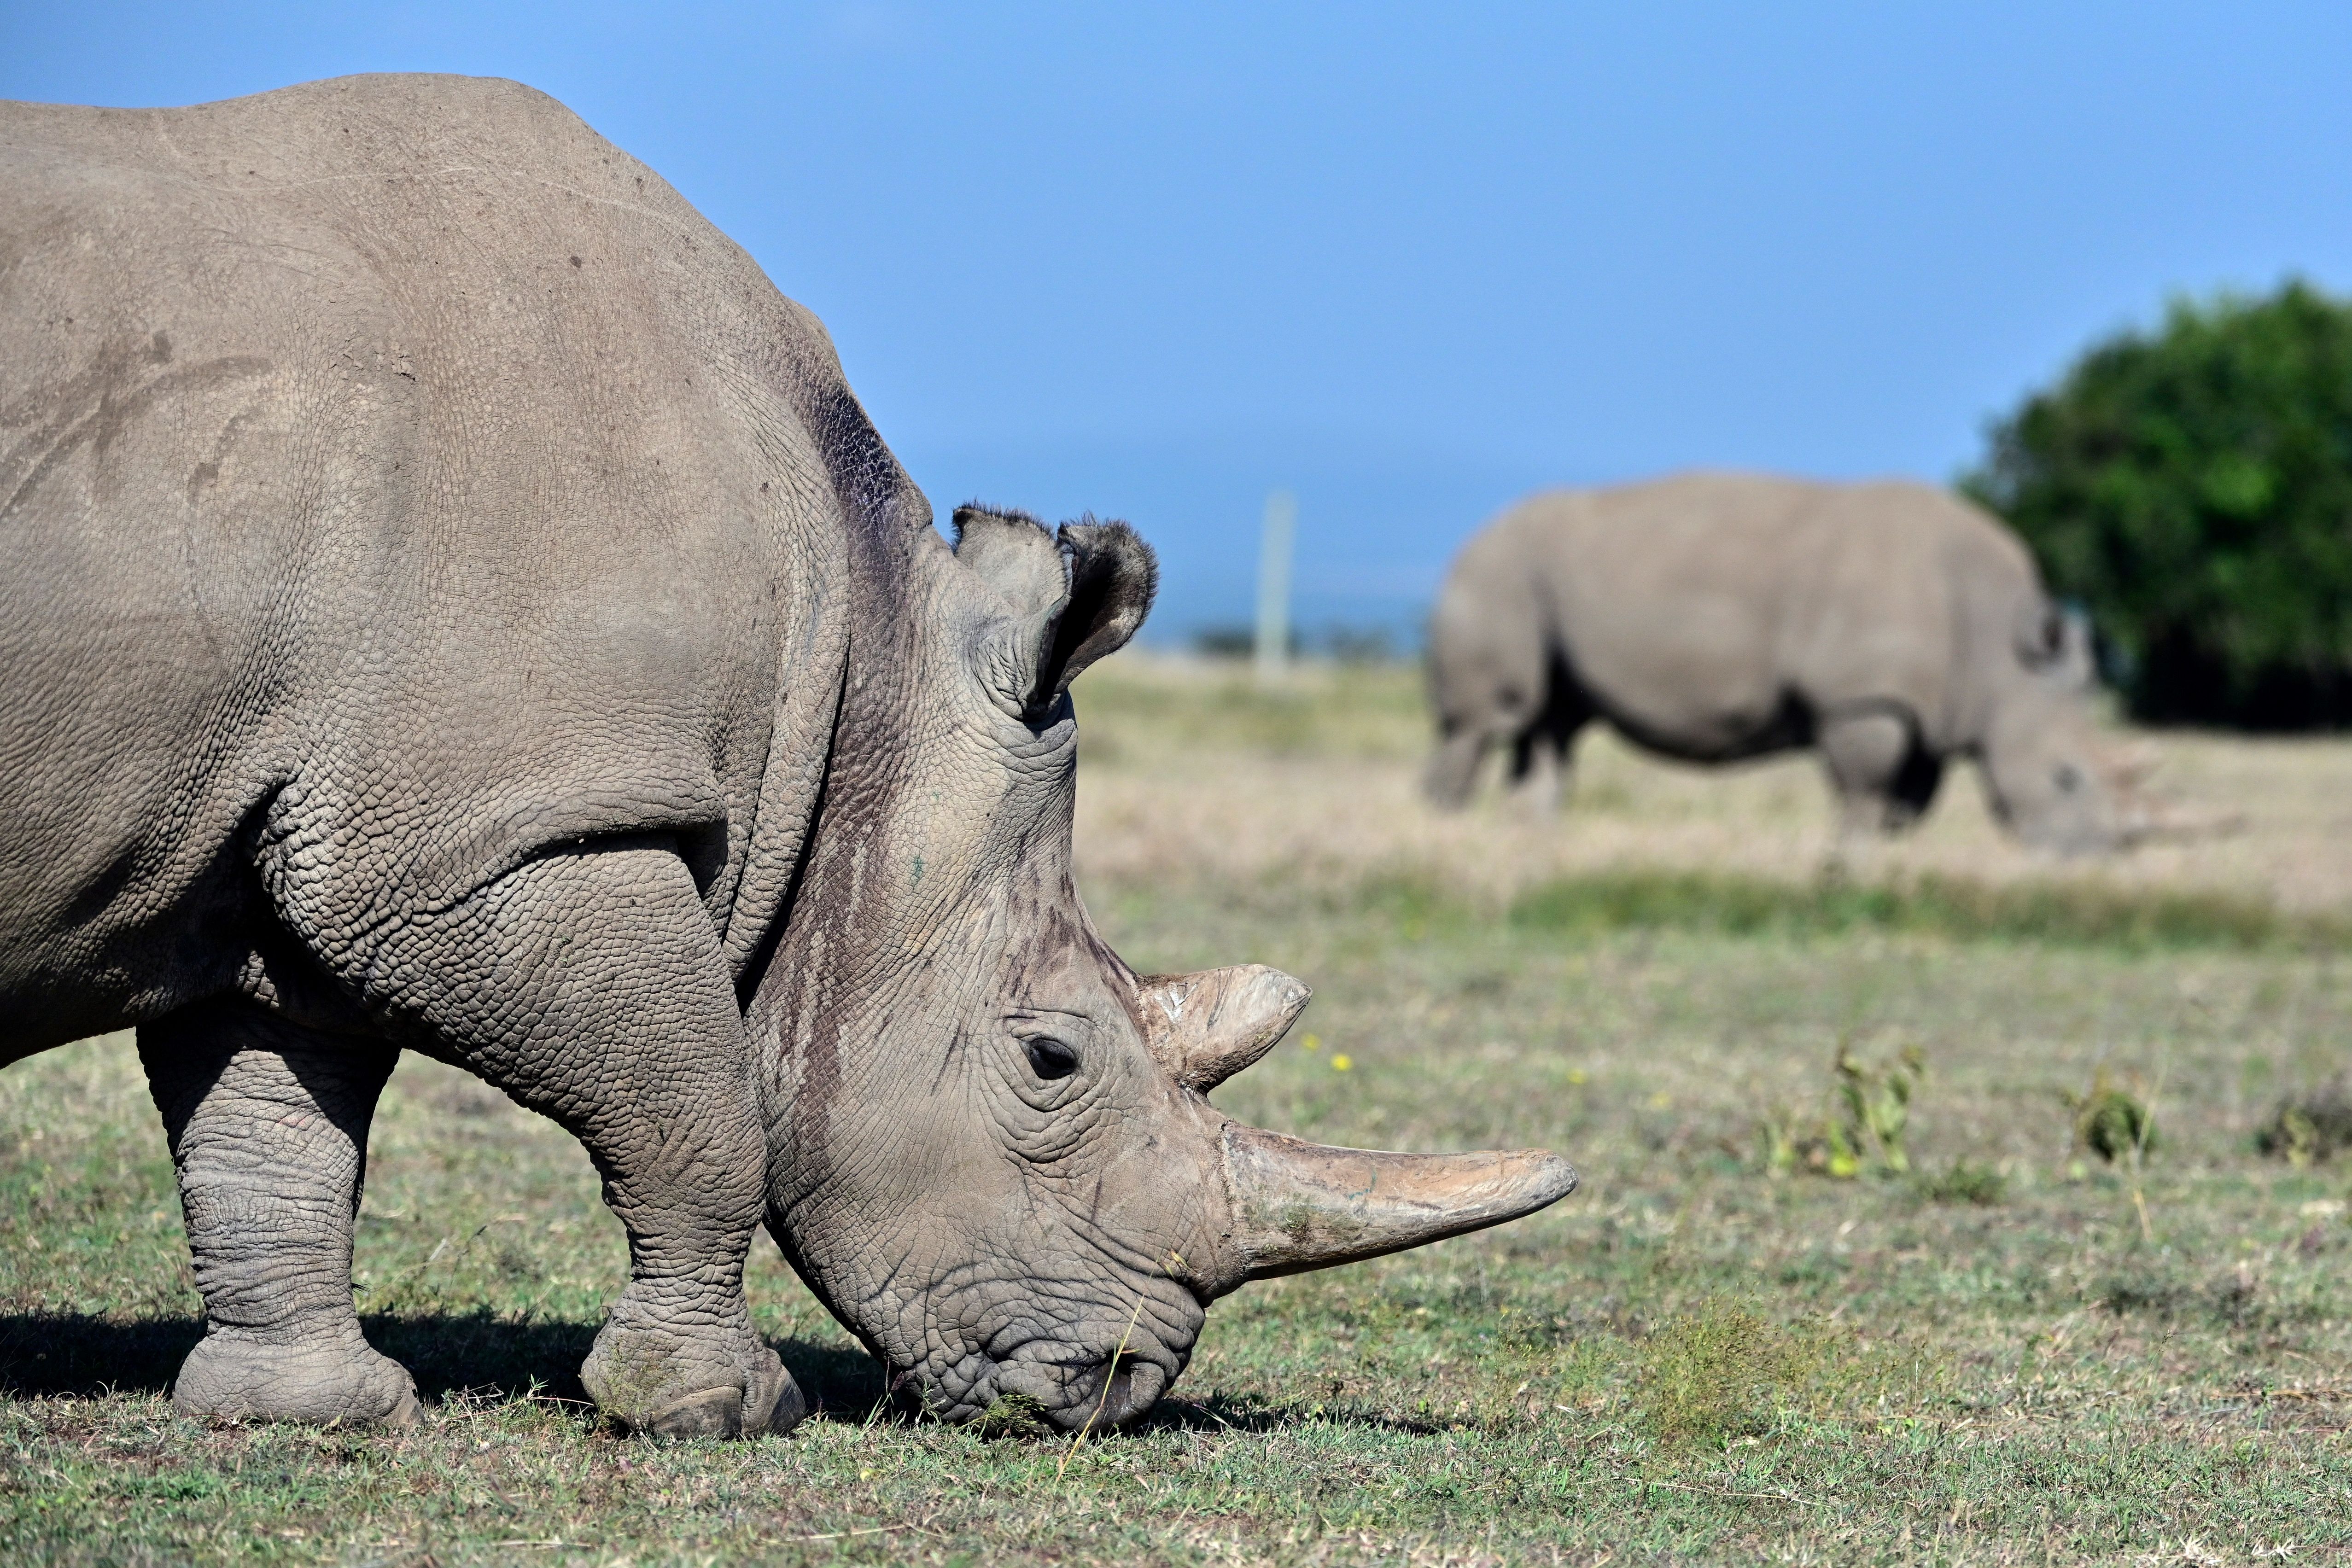 Northern White Rhinos The Audacious Plan That Could Save A Species c News